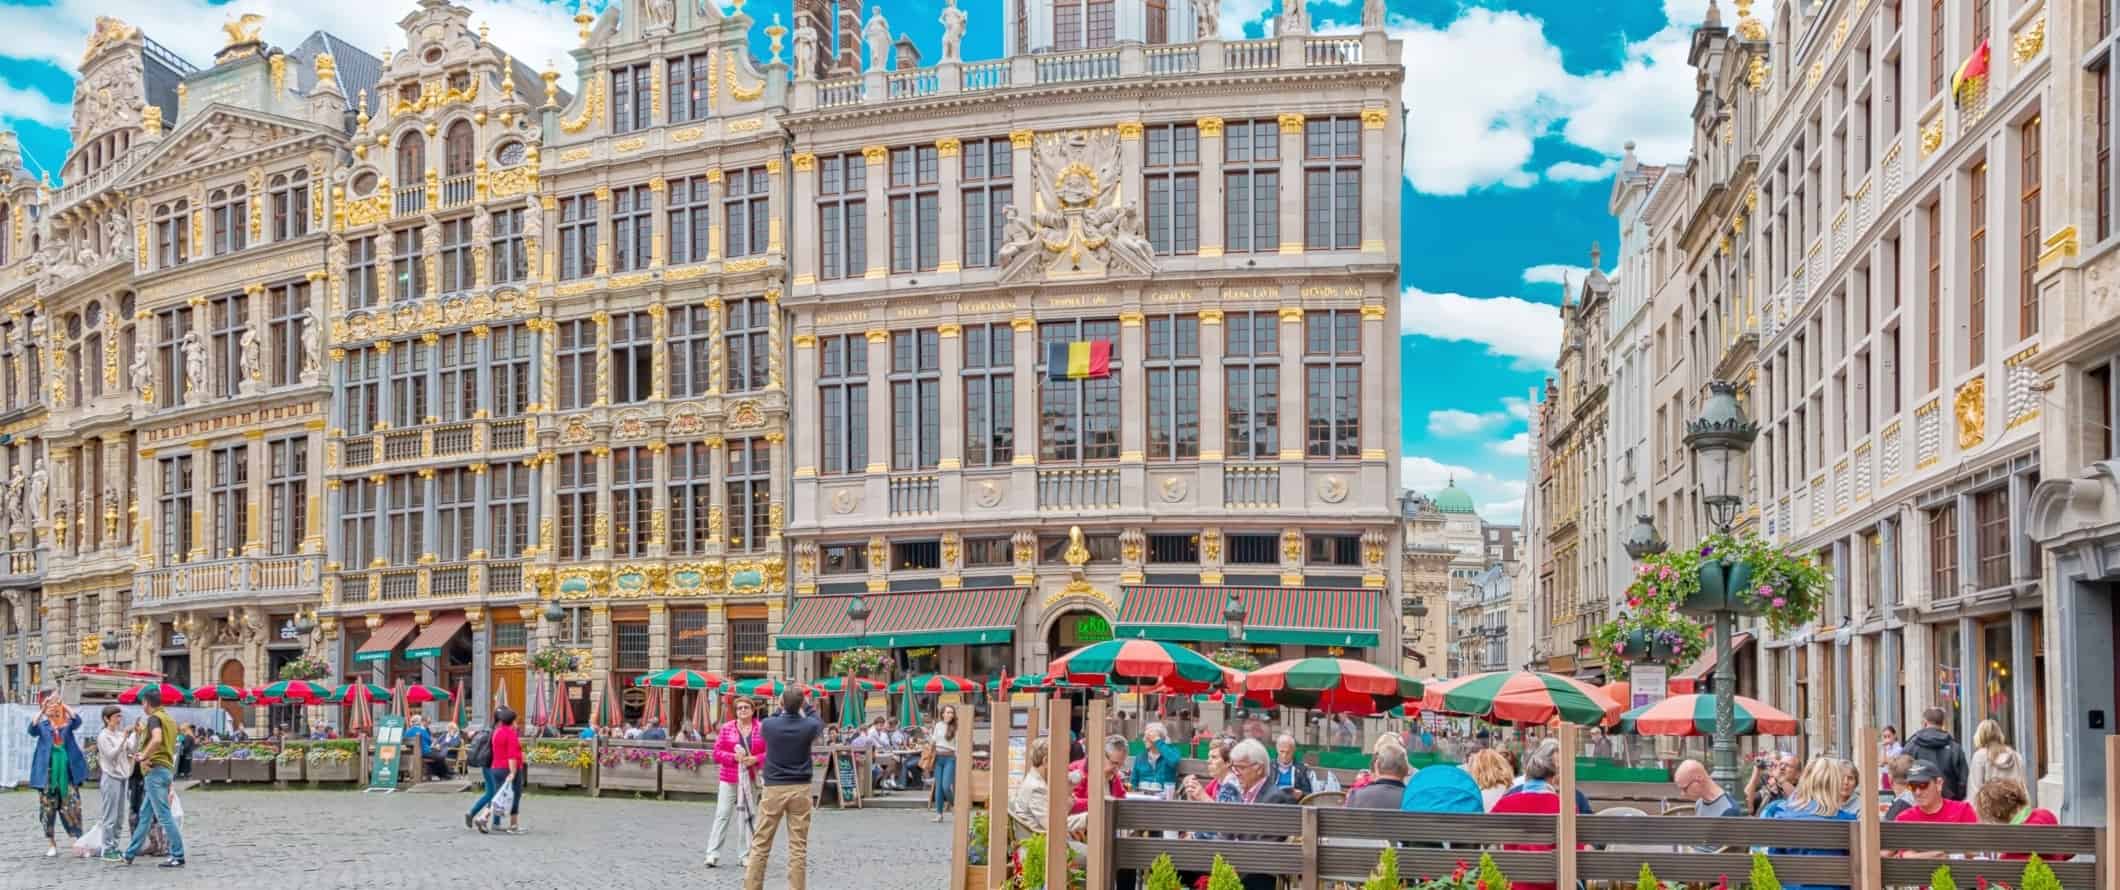 The historic Grand Place plaza with gilded art nouveau buildings in Brussels, Belgium